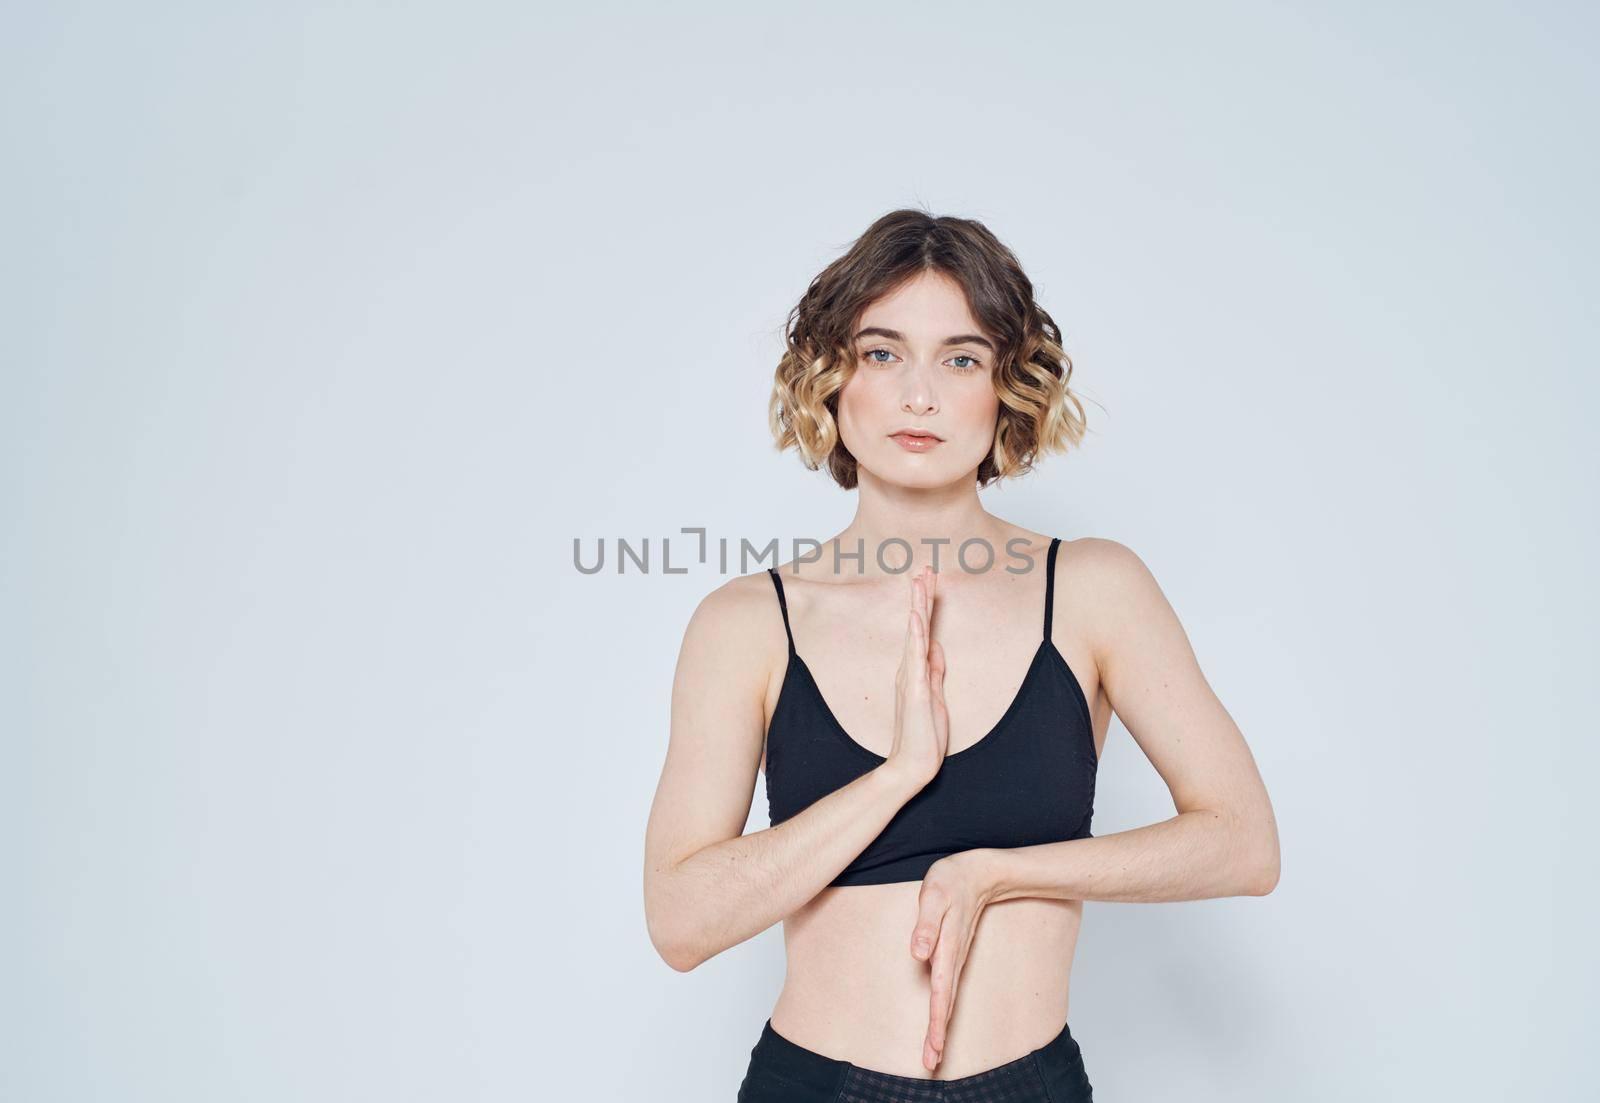 Slender woman in sportswear gestures with her hands yoga meditation. High quality photo